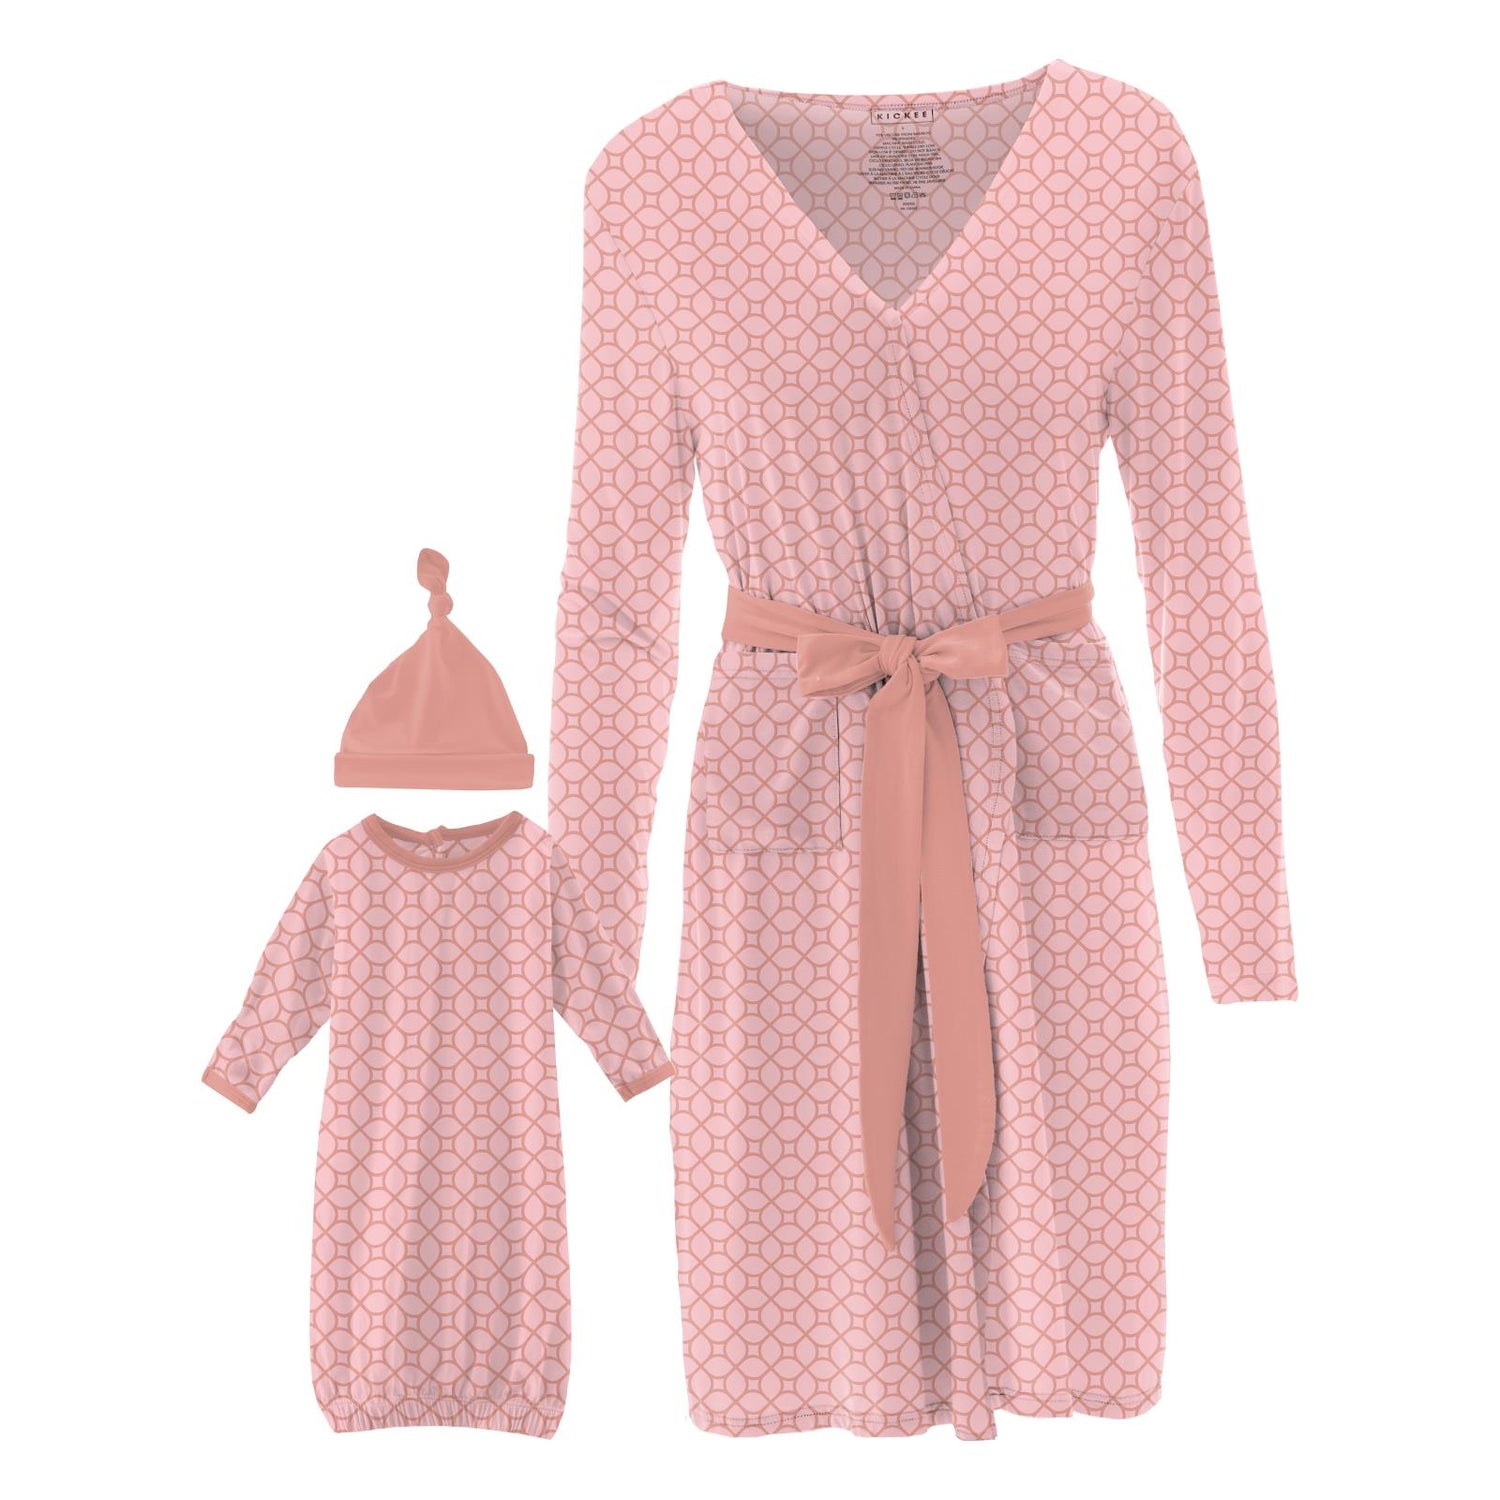 Women's Mid Length Lounge Robe & Layette Gown Set in Blush Spring Lattice